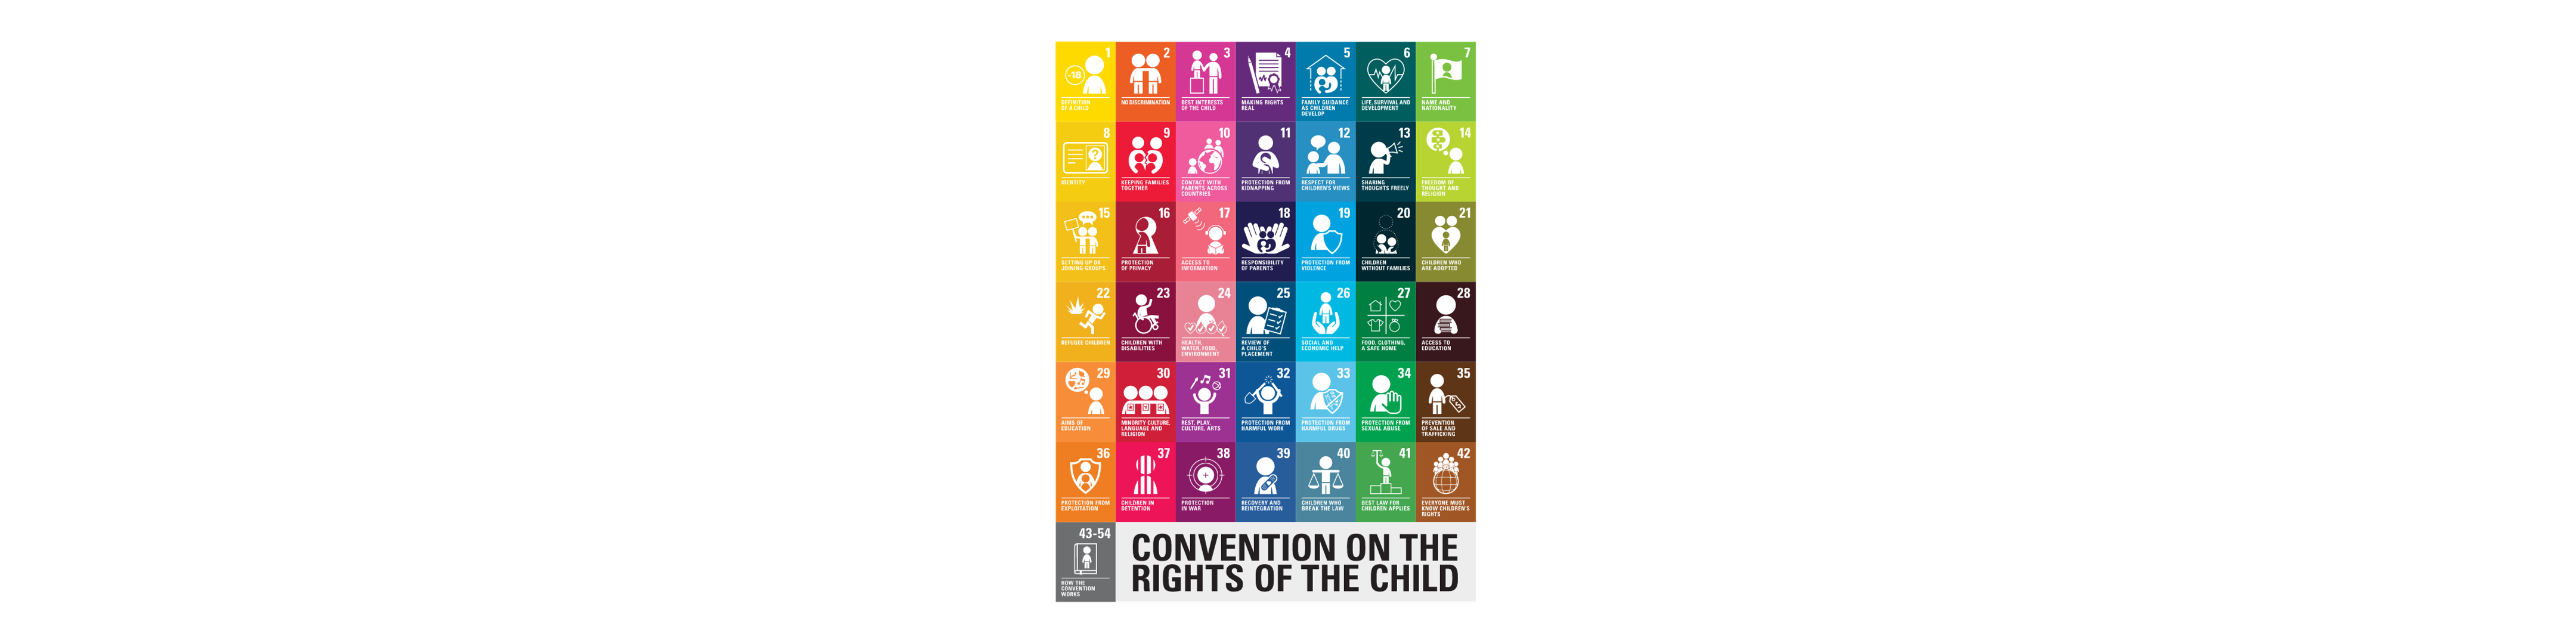 Convention rights child image